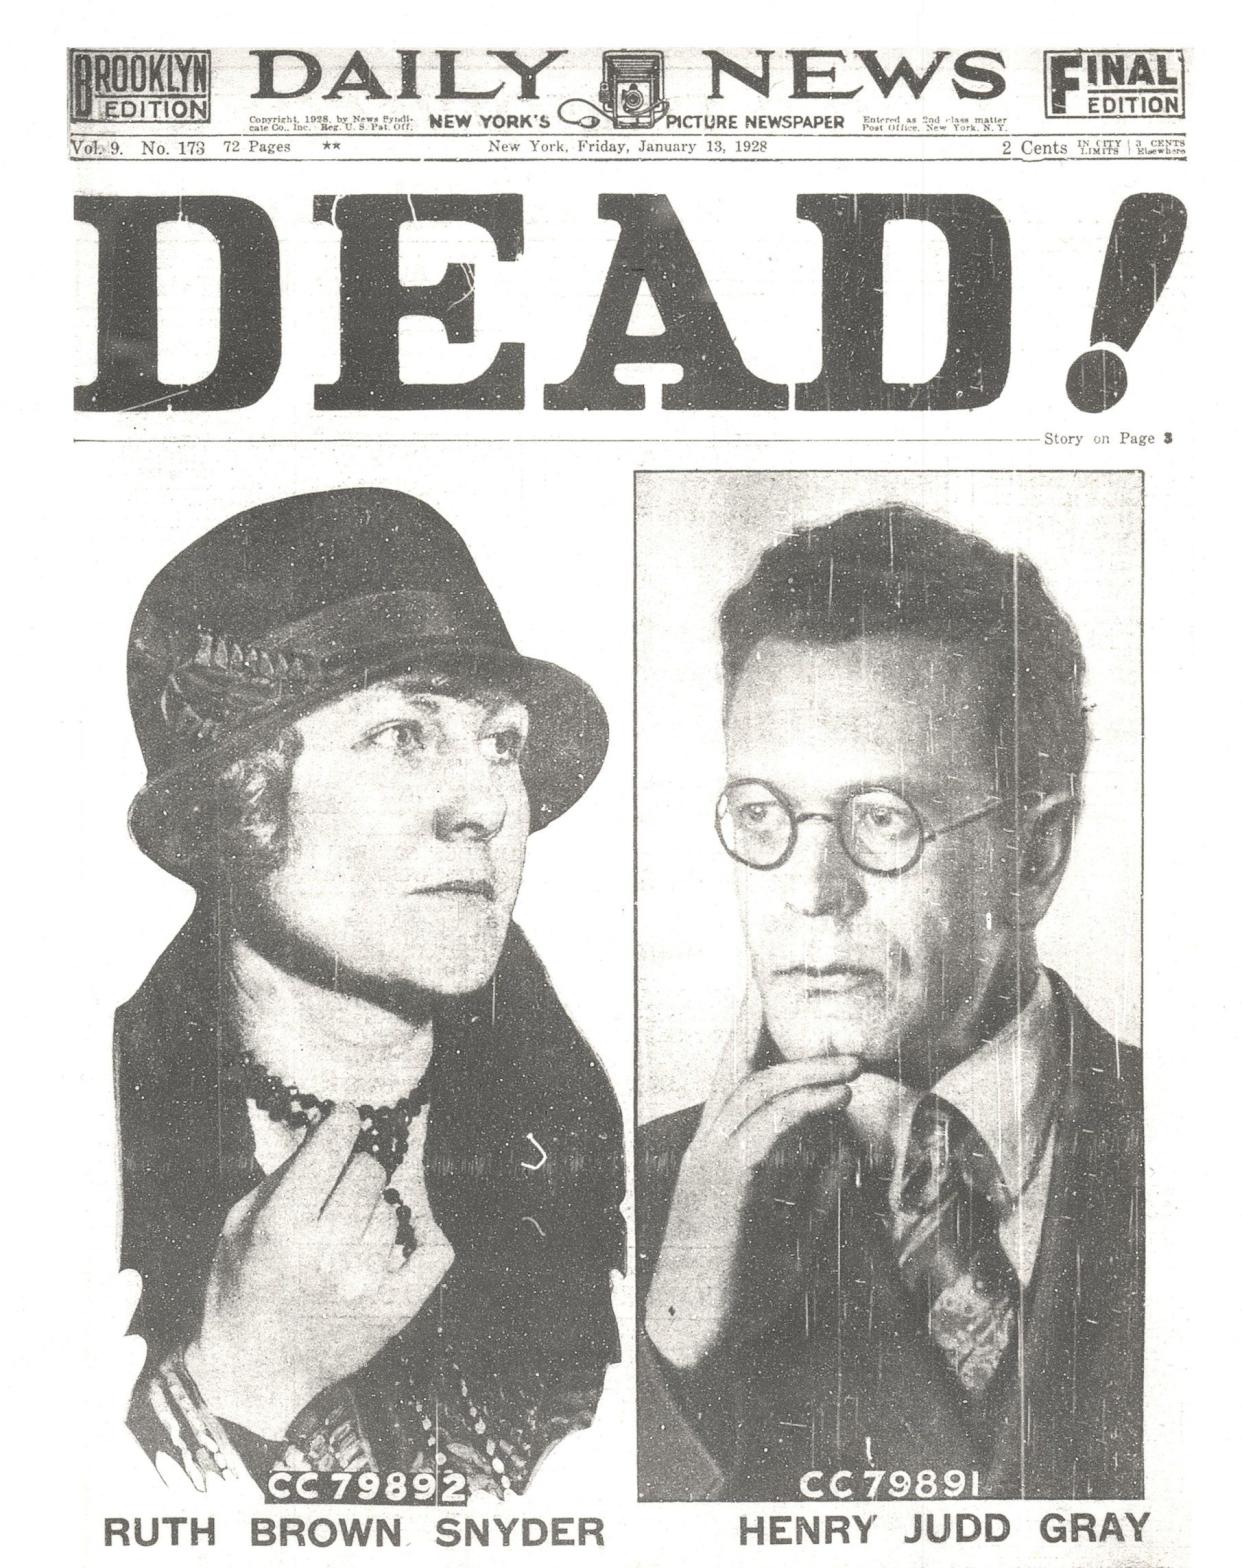 The New York Daily News reports the execution of Ruth Snyder and Henry Judd